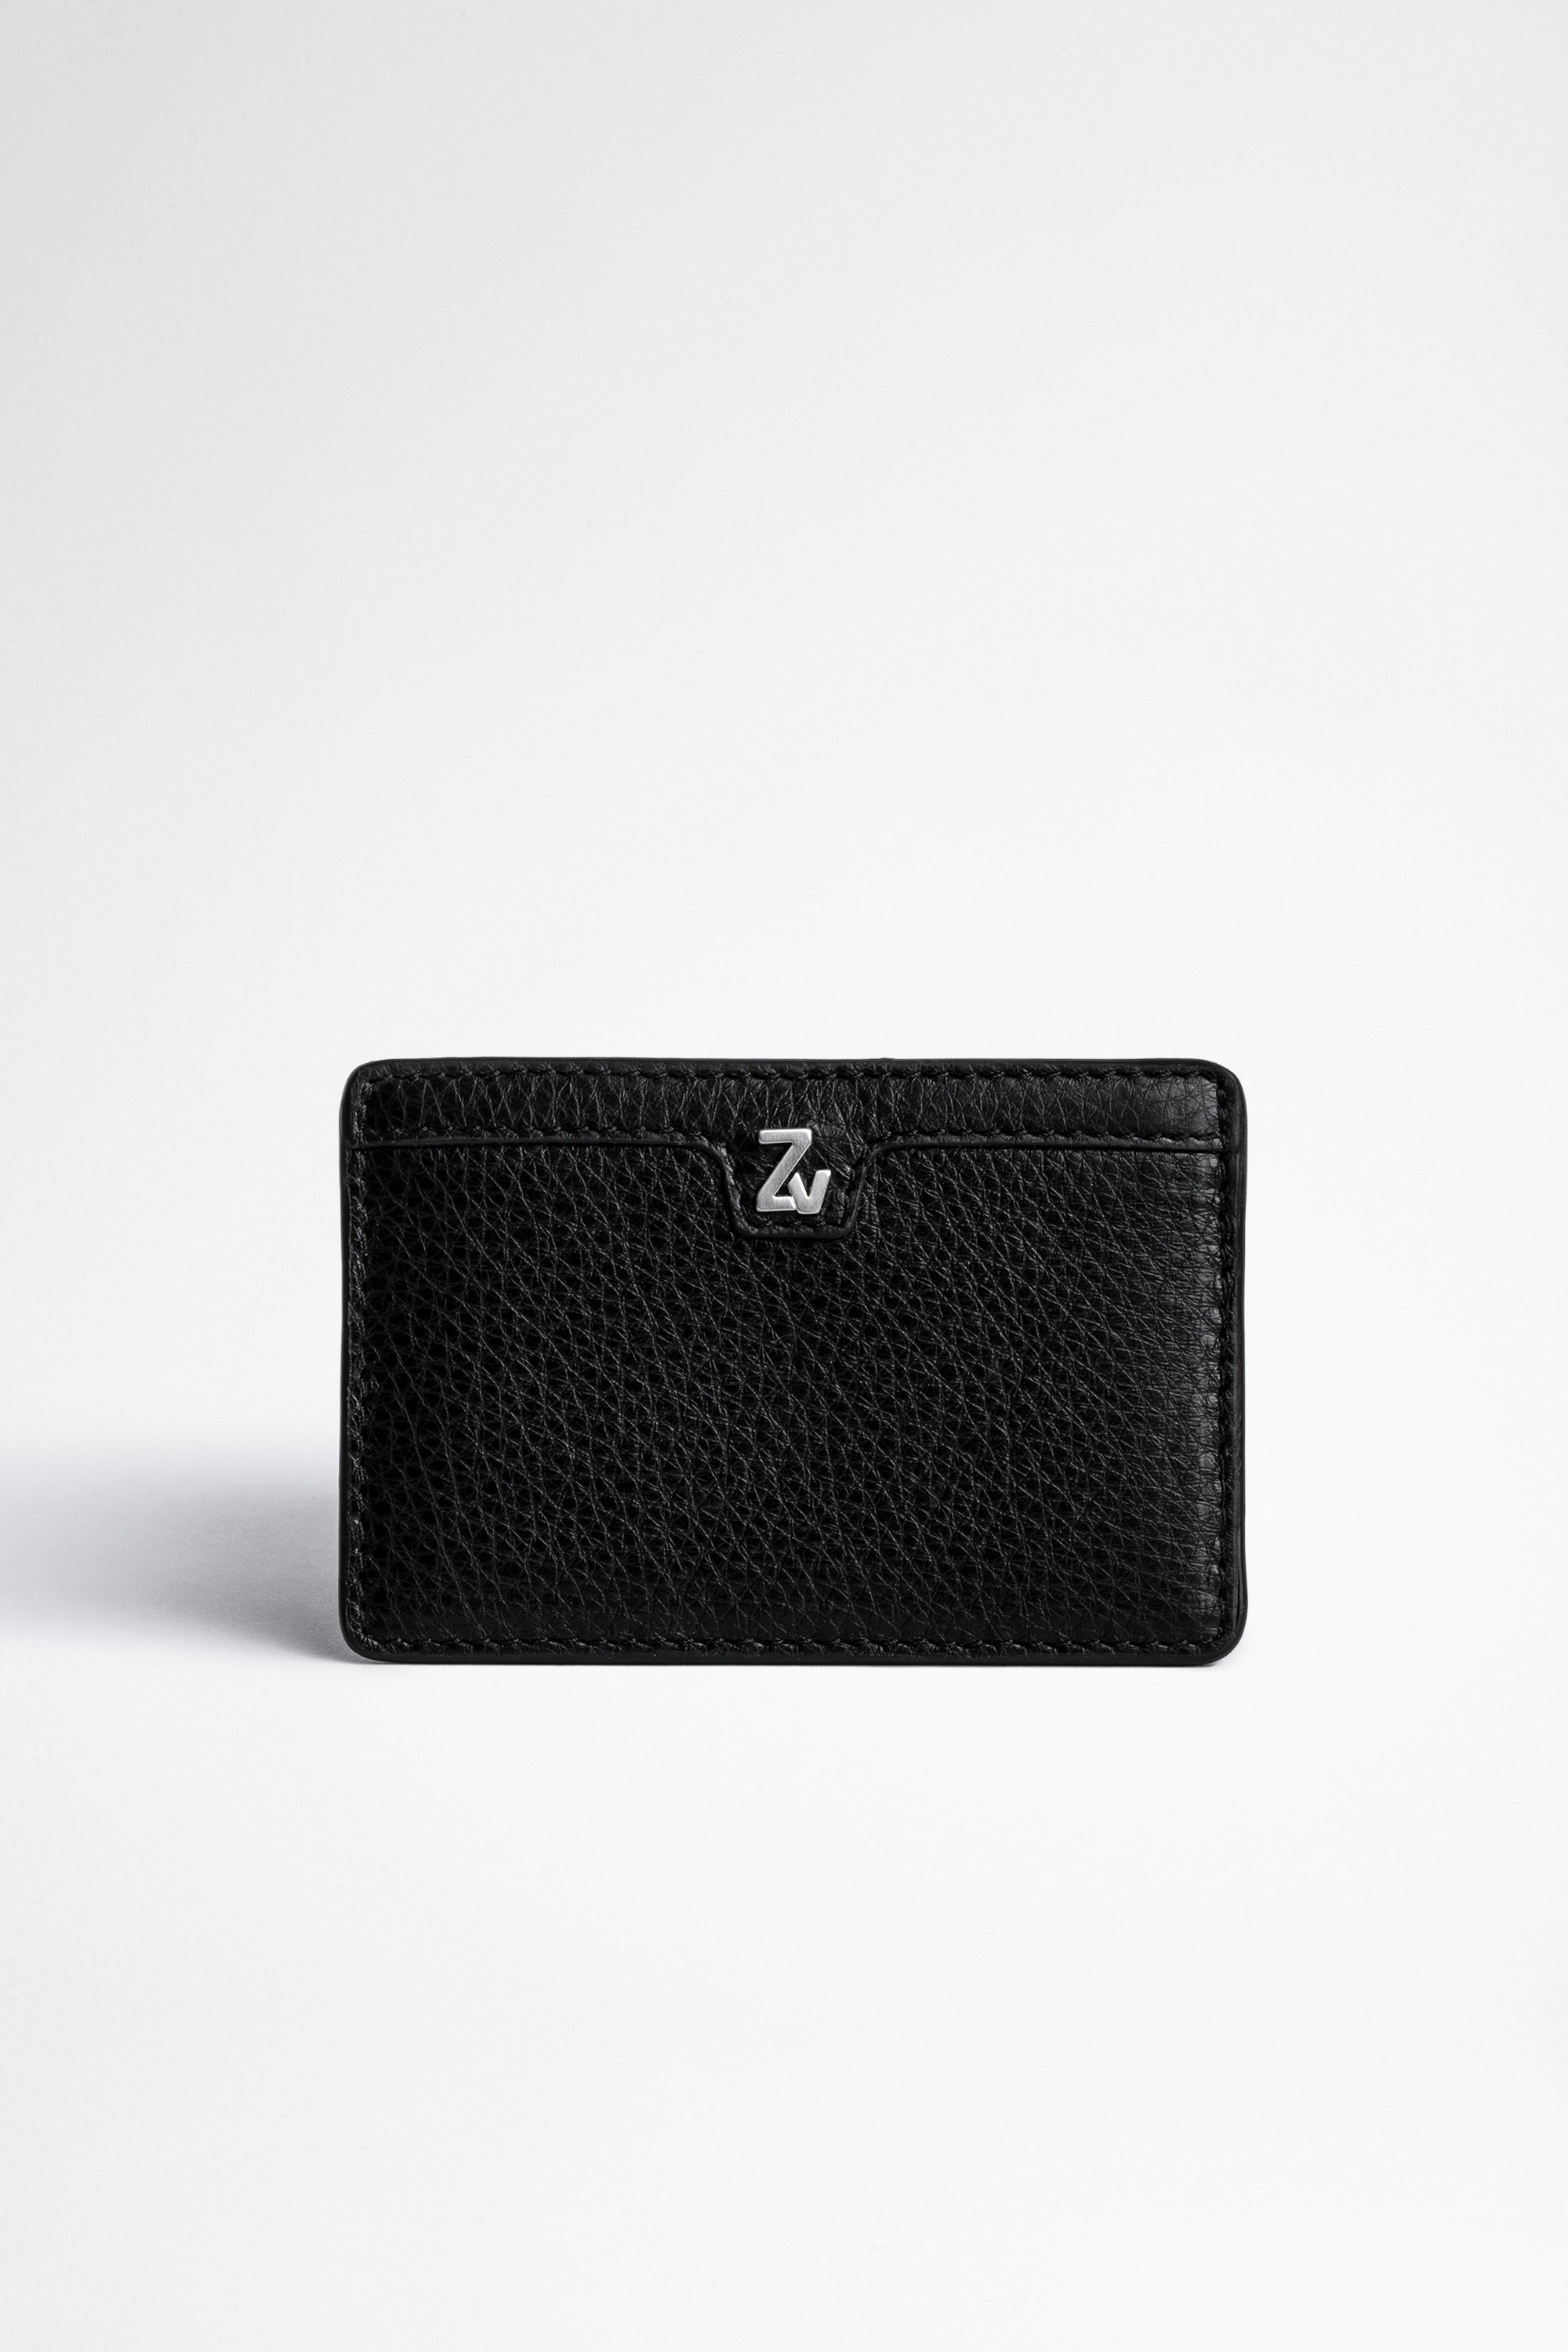 ZV Initiale Nyro レザー財布 Black grained leather card holder